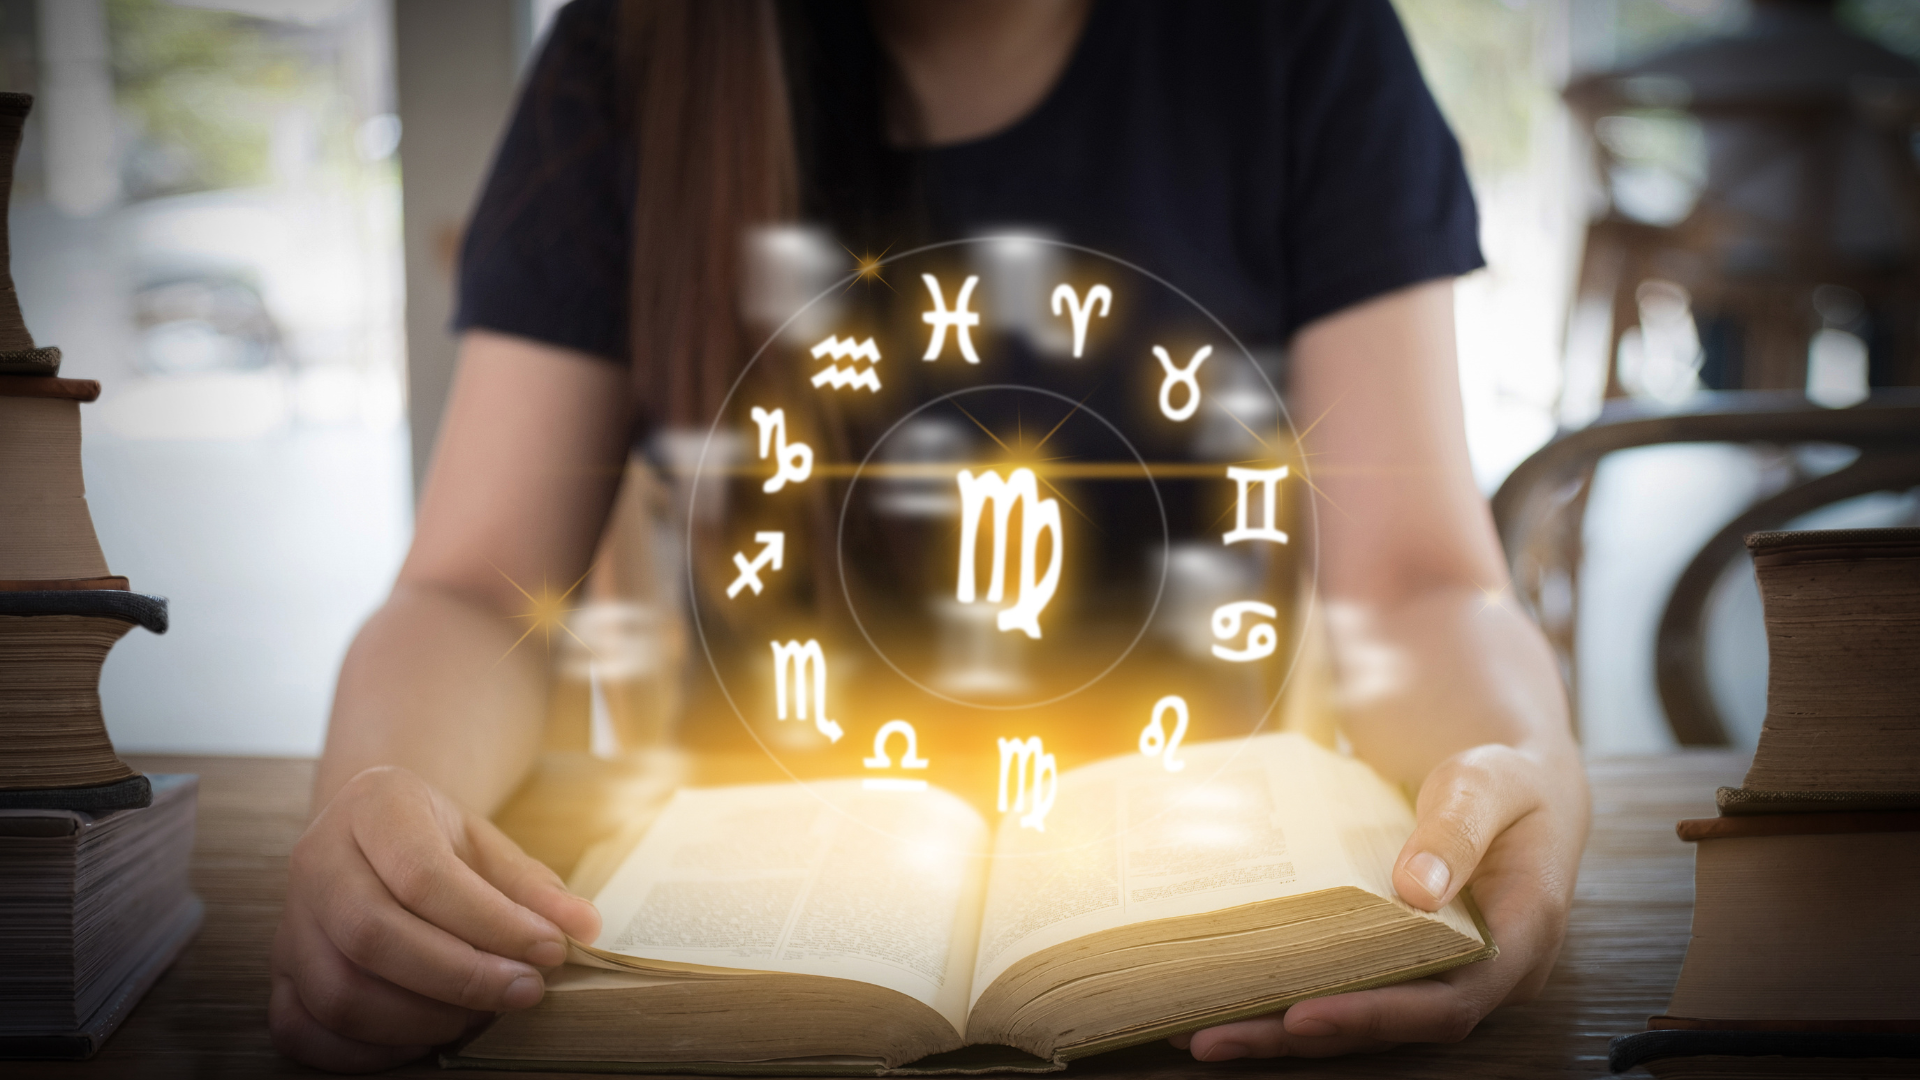 Woman looking a book with symbols of star signs in a circle above